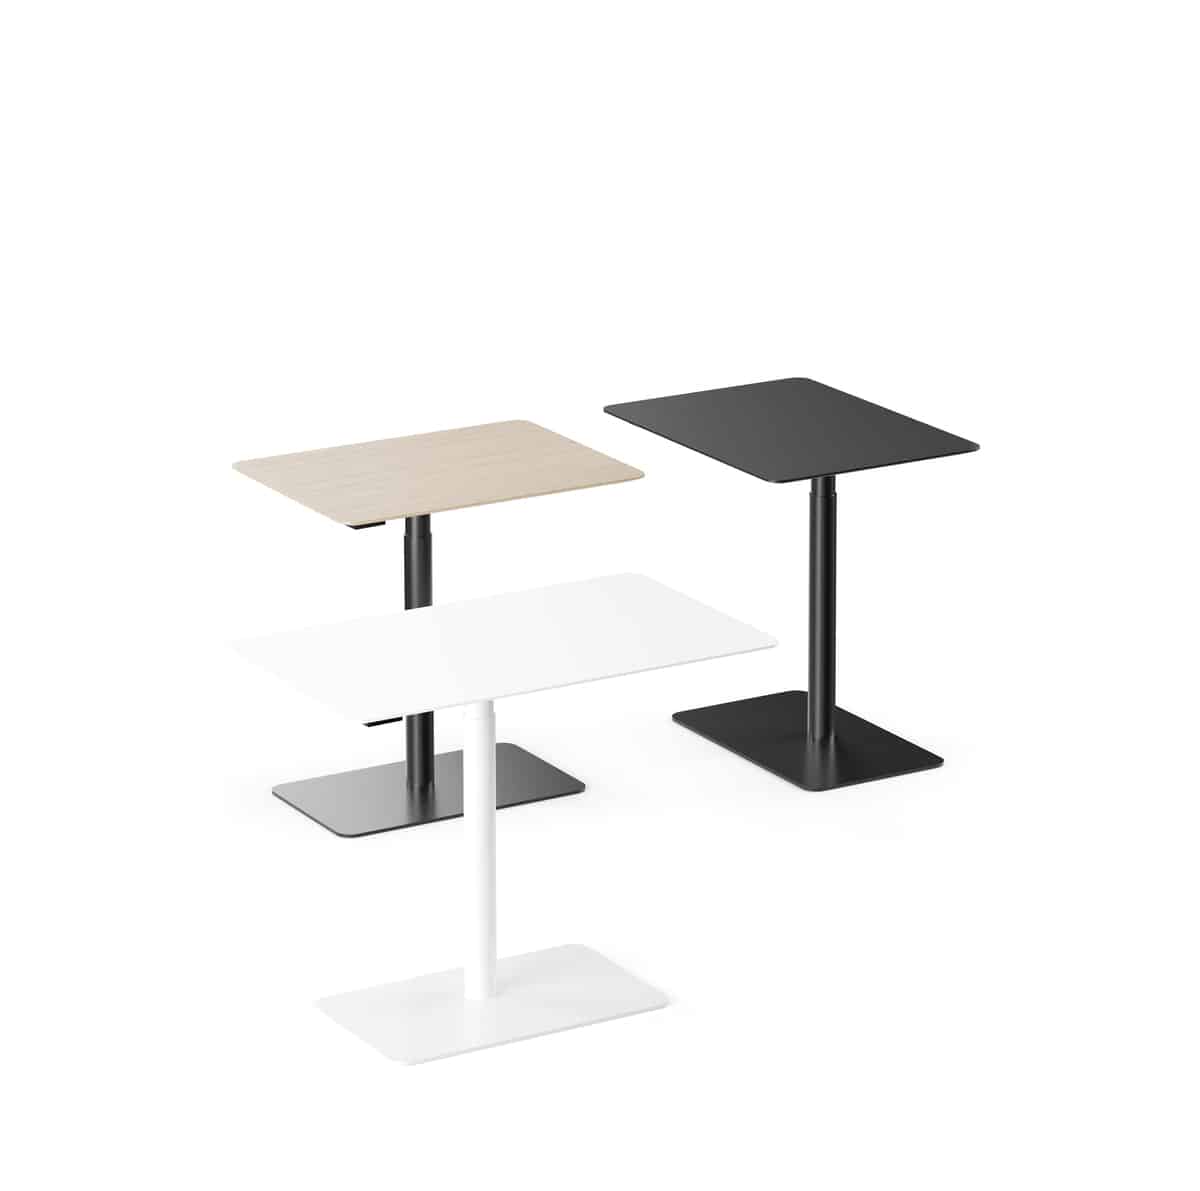 01_Bobby_sit_and_stand_table_group_01_Documents_jpg_1200_px